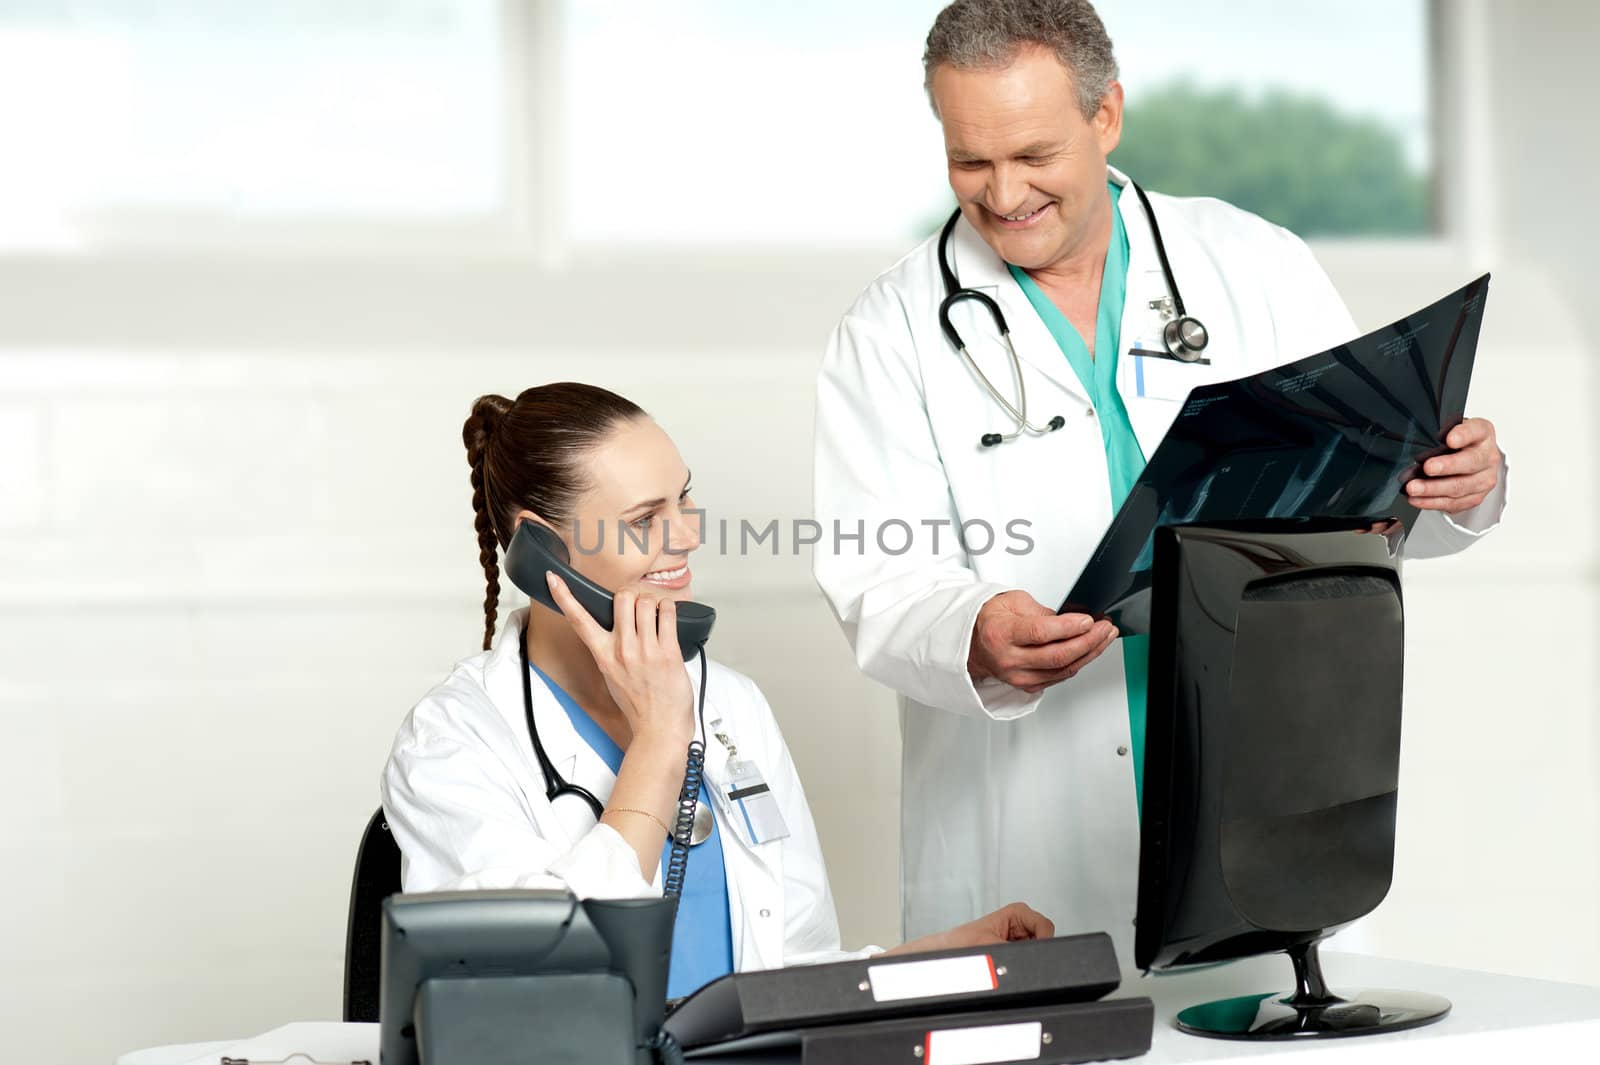 Doctors team in a lab discussing x-ray report. Woman on a call and man showing x-ray report to woman